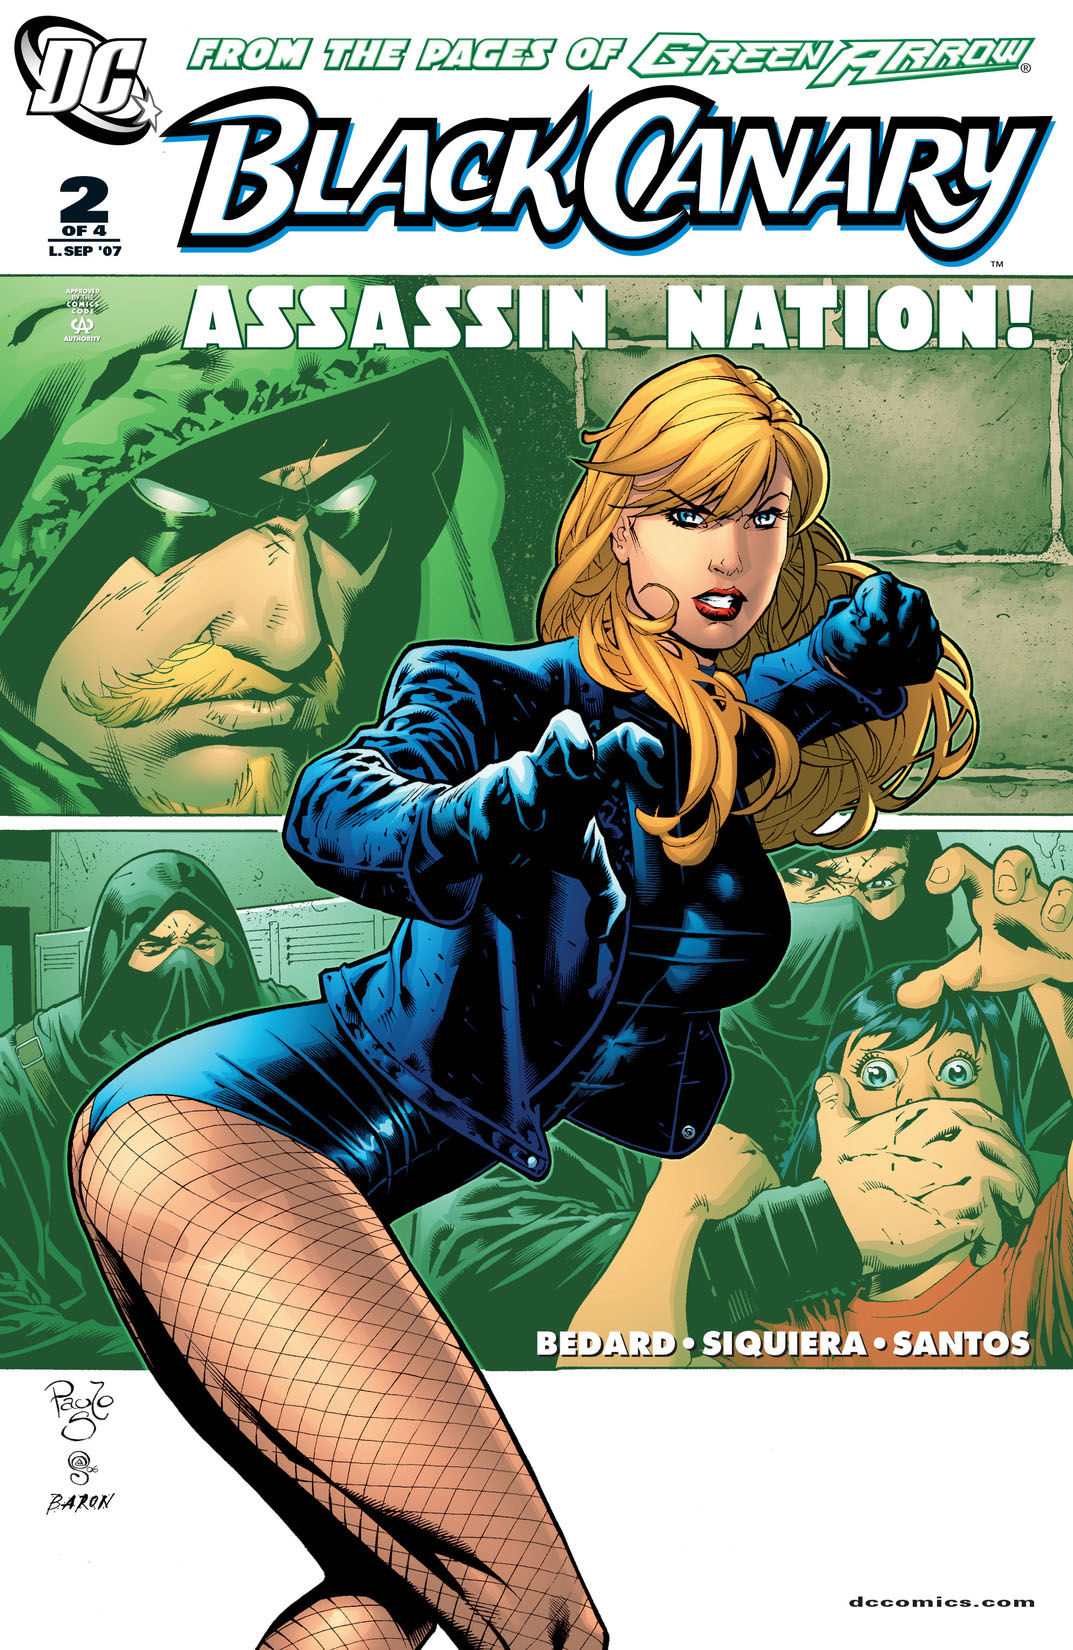 Black Canary (2007-) #2 preview images